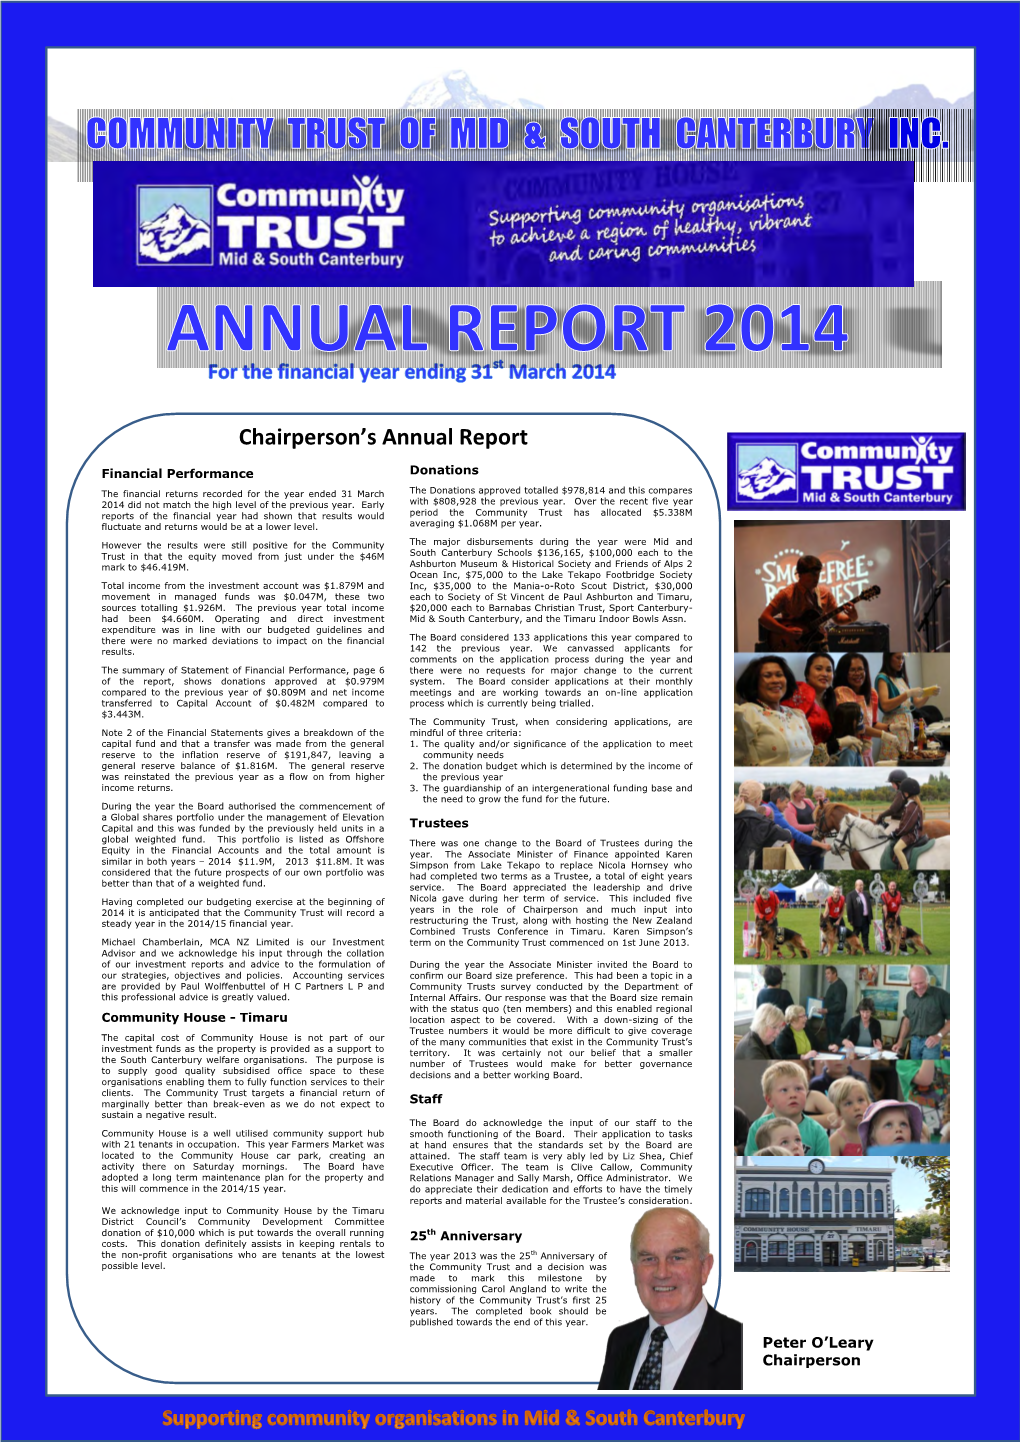 Chairperson's Annual Report